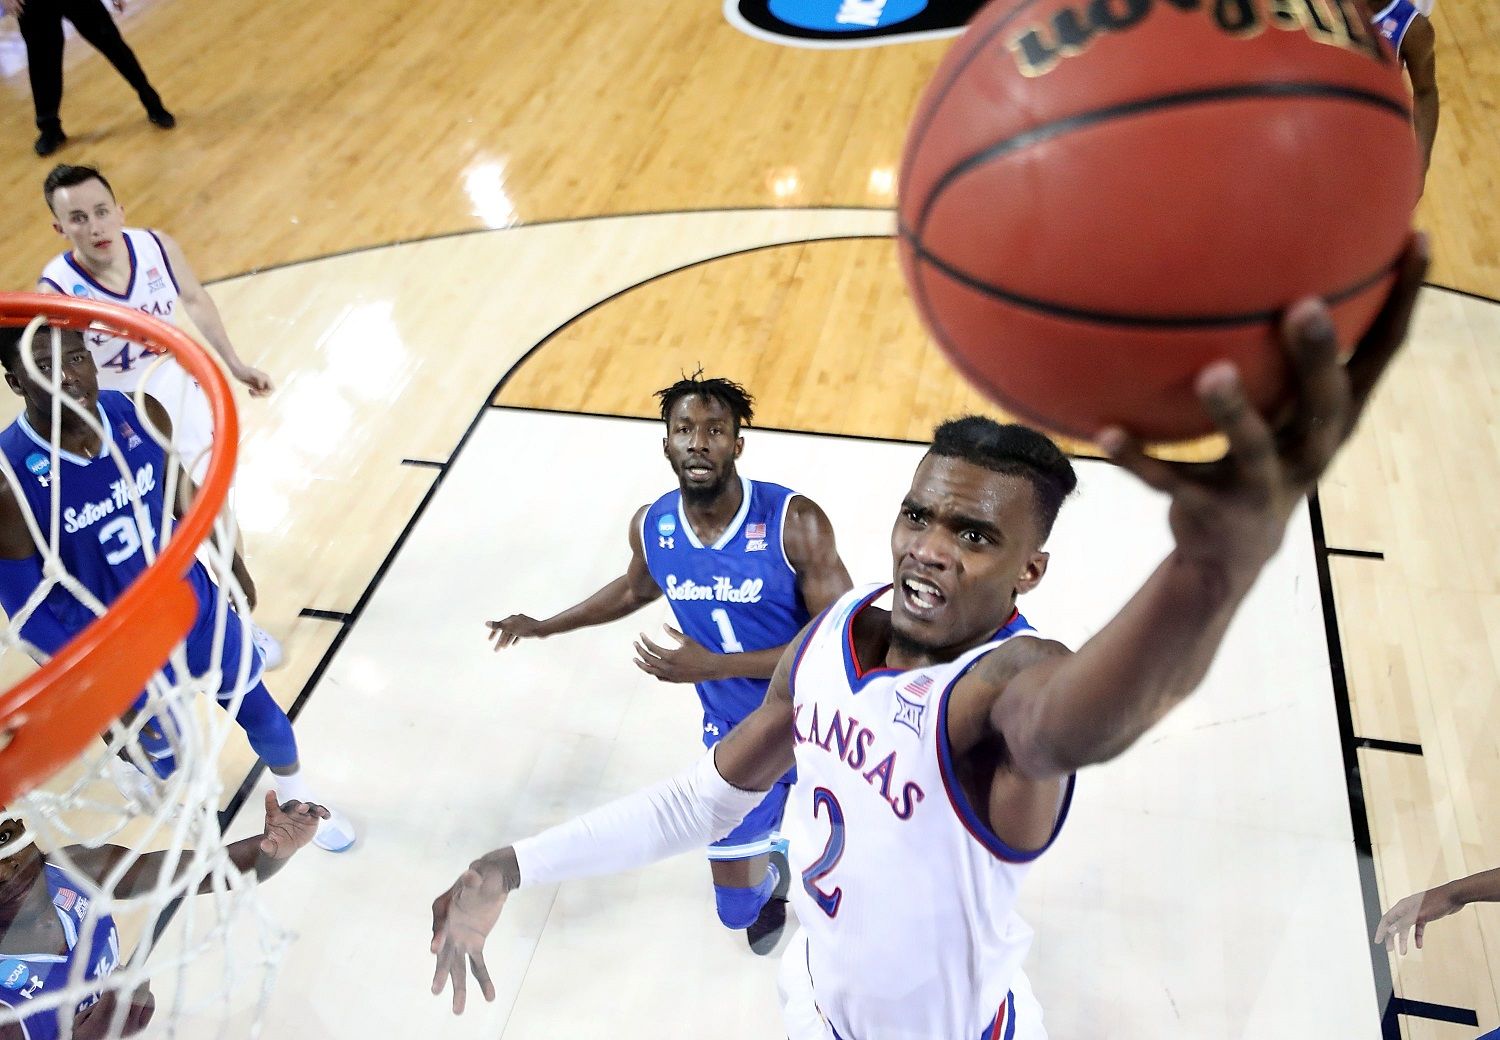 WICHITA, KS - MARCH 17:  Lagerald Vick #2 of the Kansas Jayhawks drives to the basket against Seton Hall during the second round of the 2018 NCAA Men's Basketball Tournament at INTRUST Arena on March 17, 2018 in Wichita, Kansas.  (Photo by Jeff Gross/Getty Images)